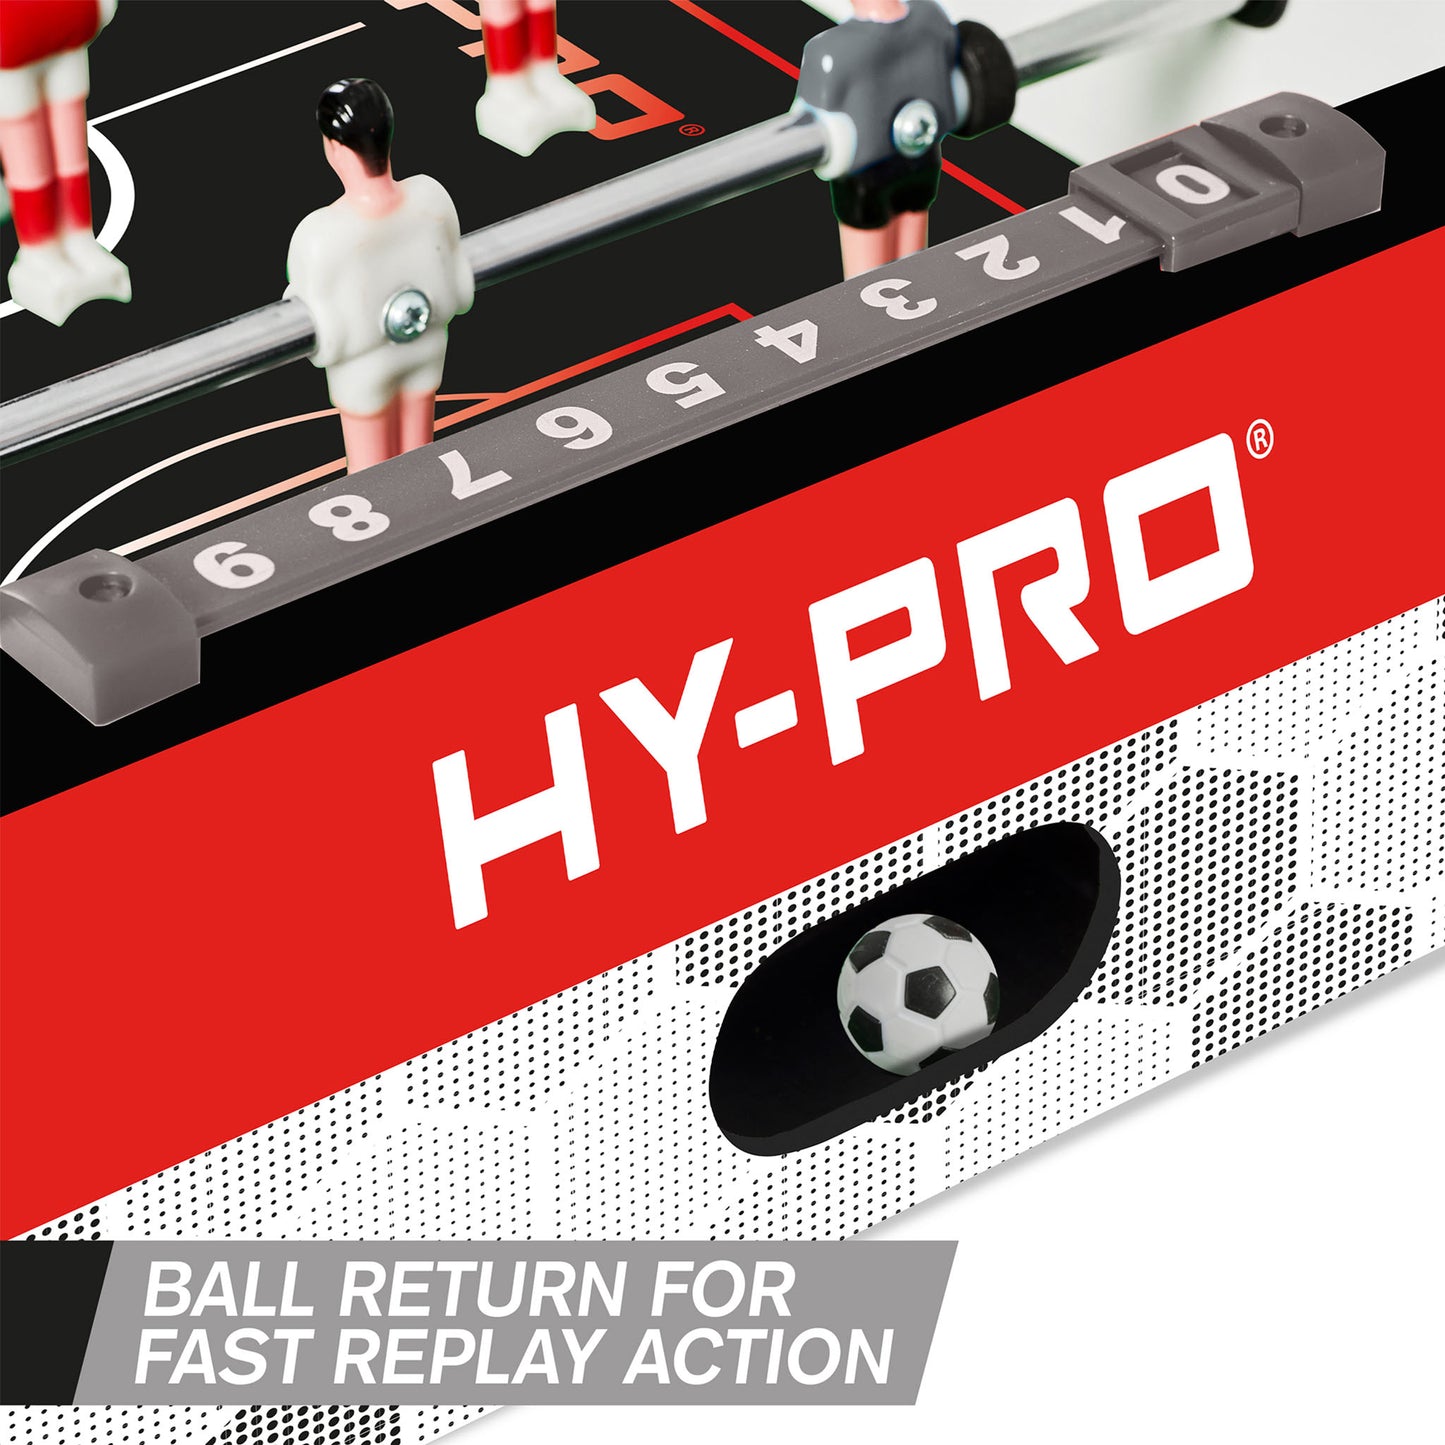 Hy-Pro 20" Table Top Football Table